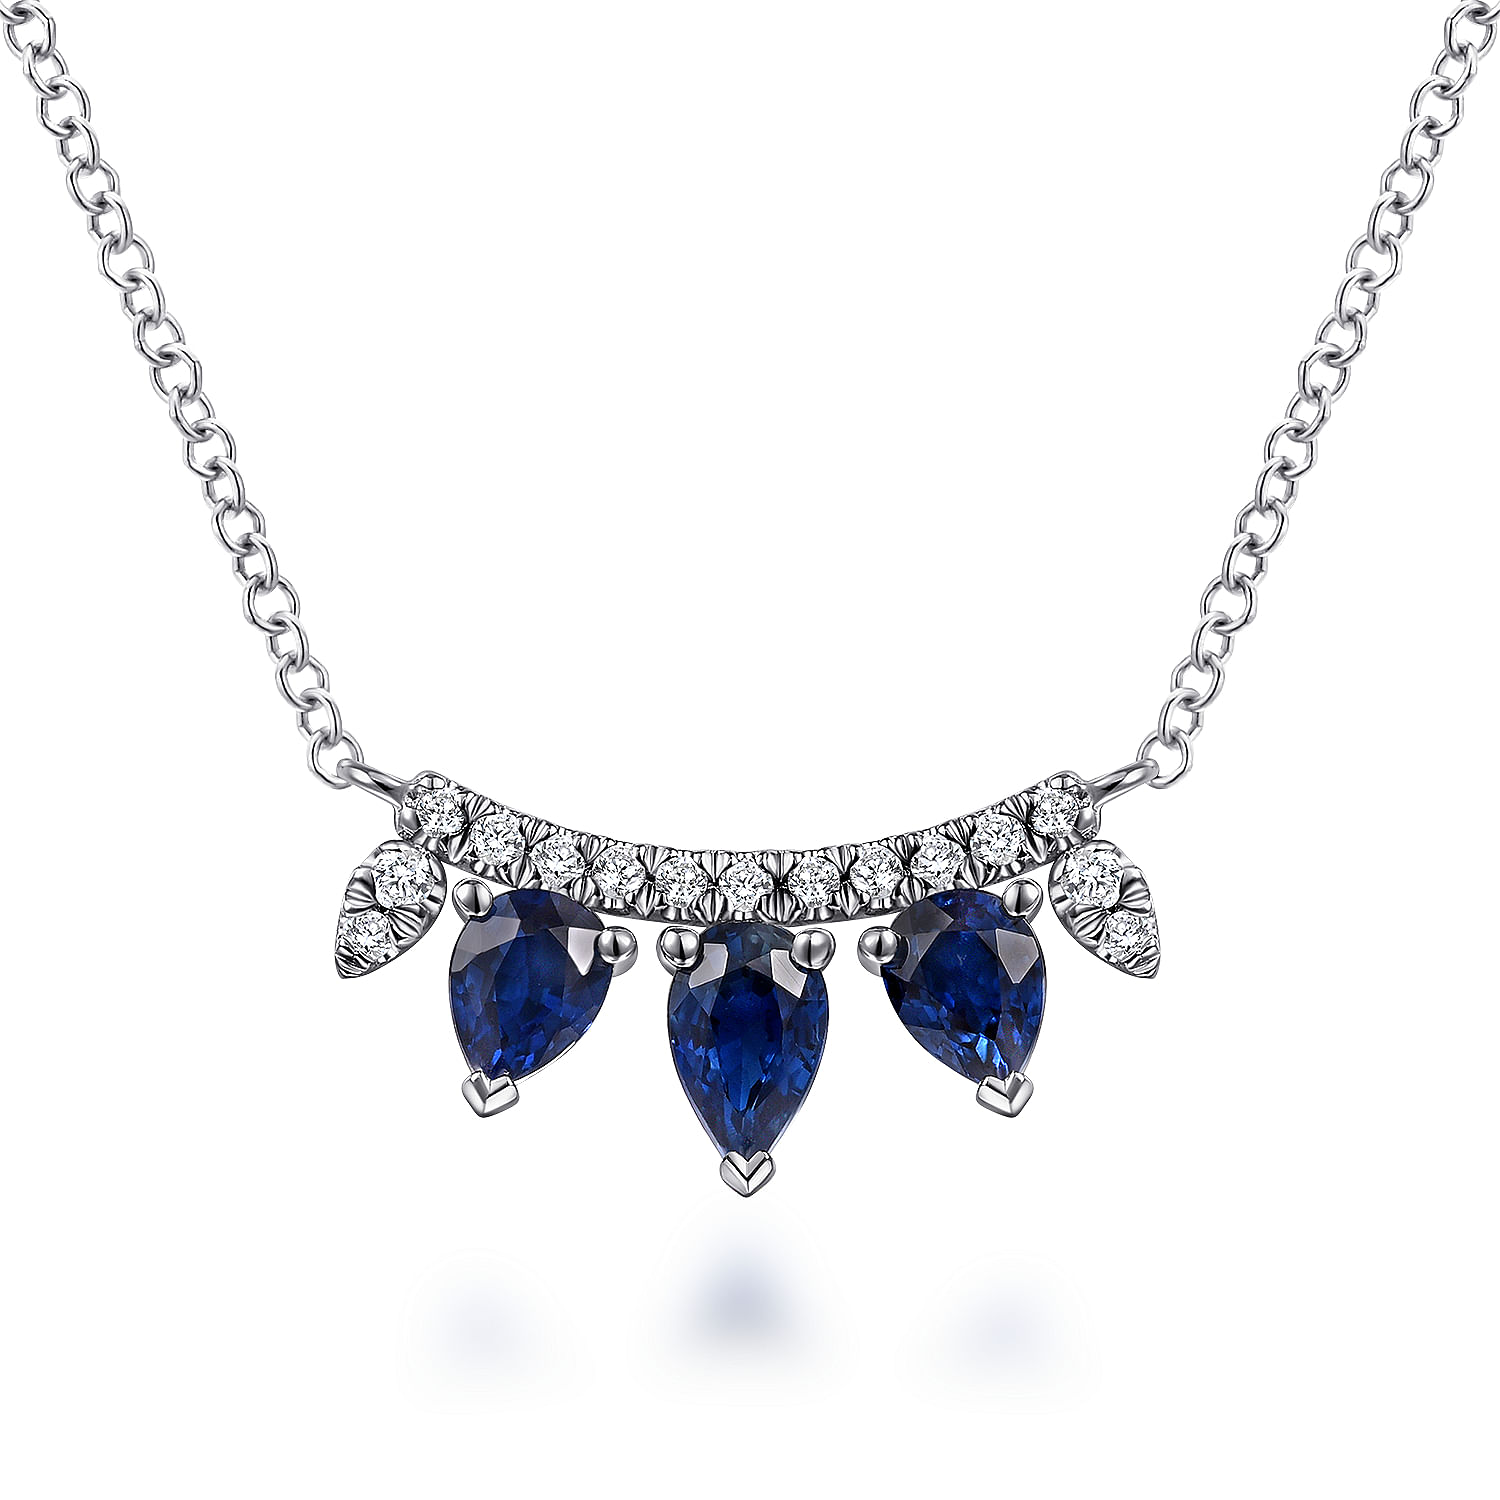 14K White Gold Pear Shaped Sapphire and Diamond Bar Pendant Necklace